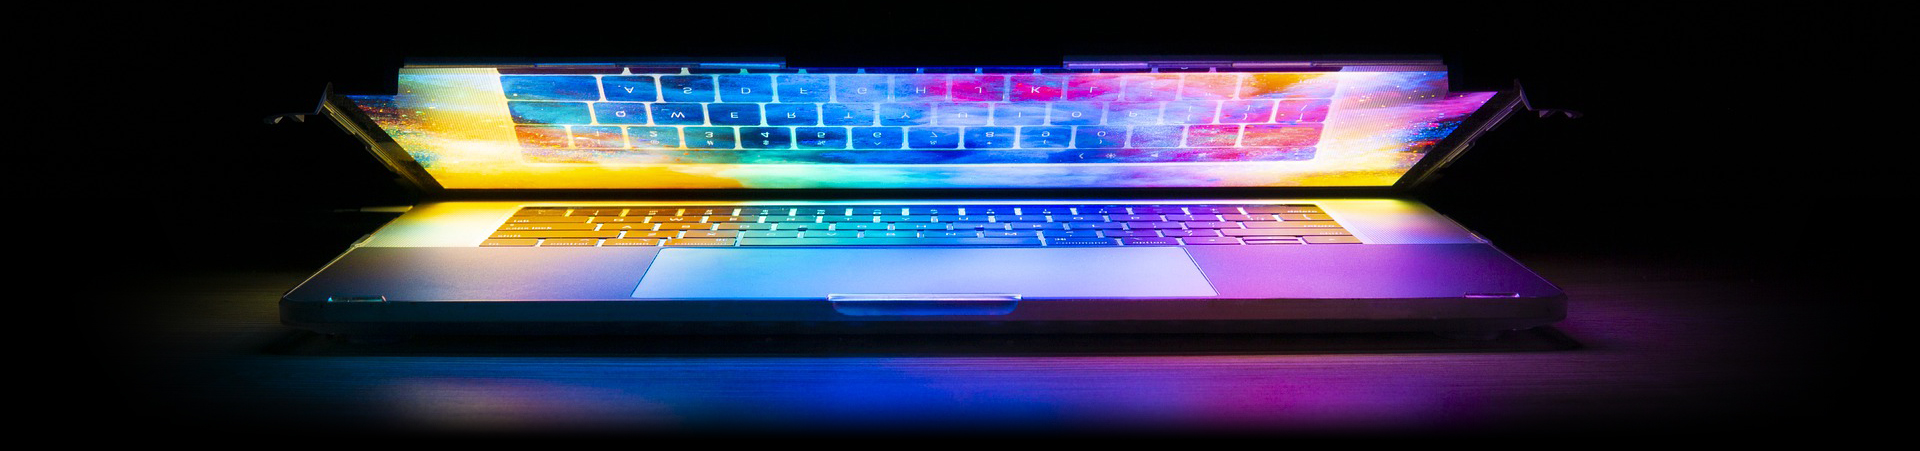 nearly cl0sed laptop with crazy lights